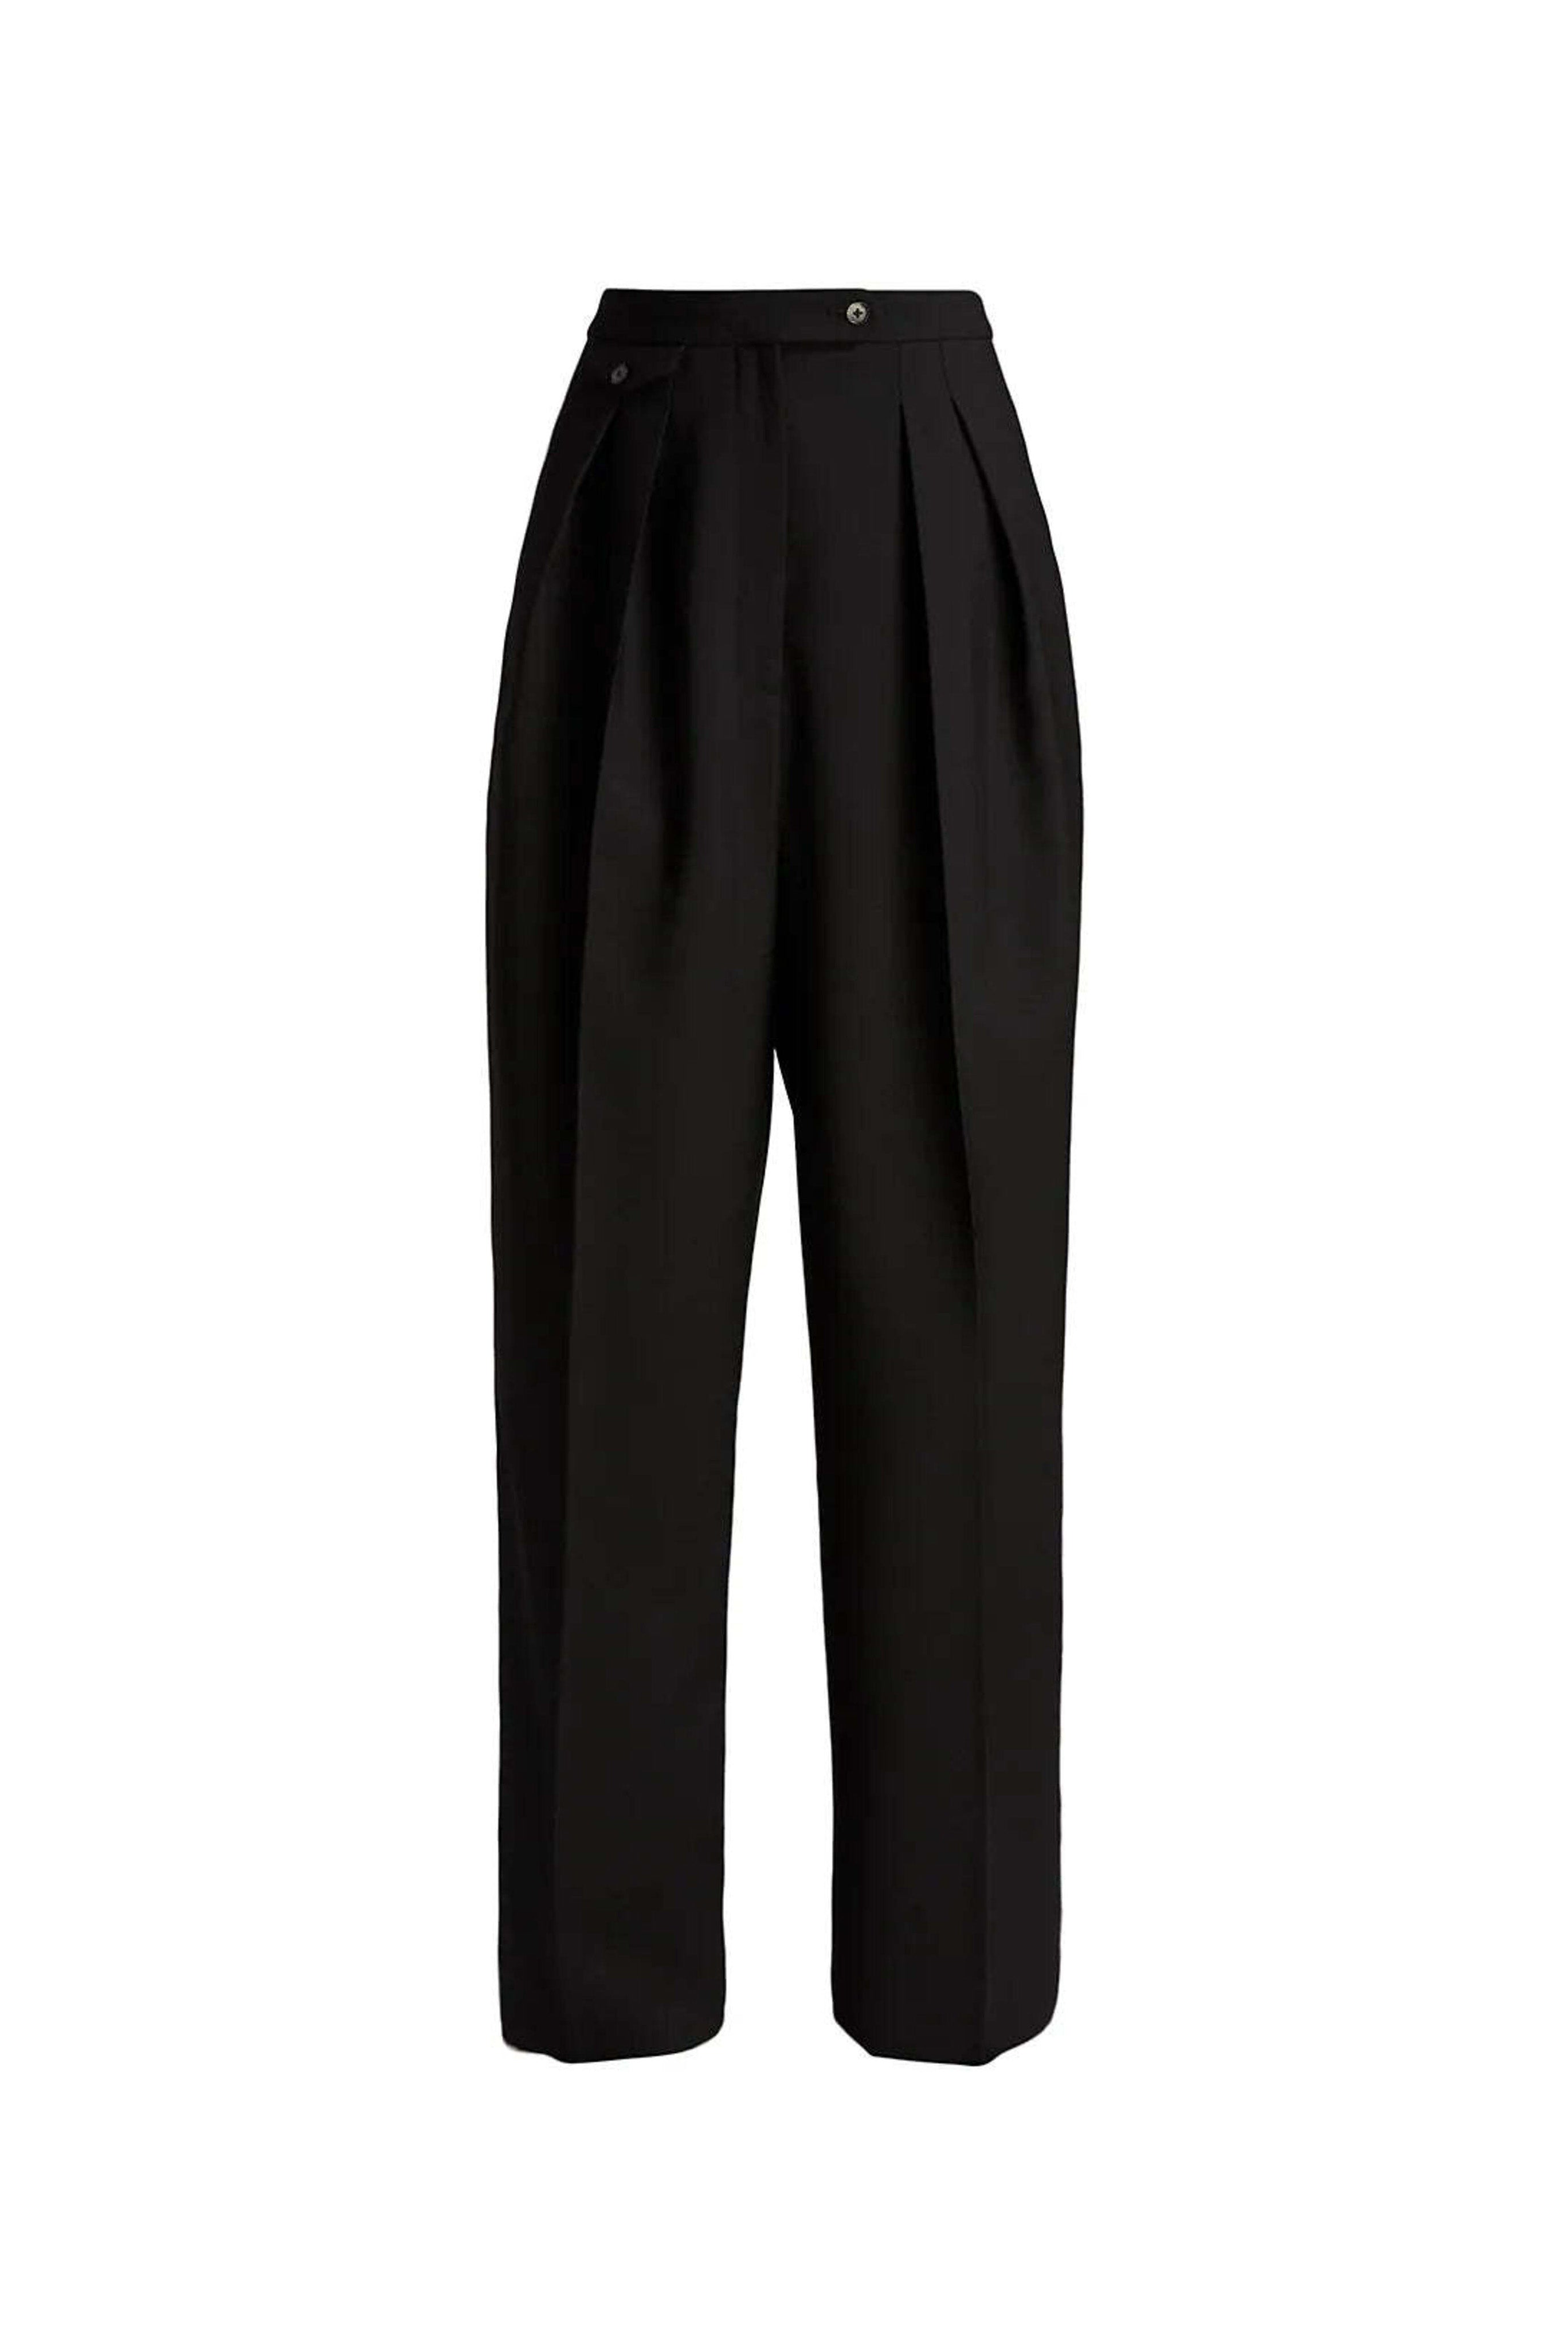 THE ROW Marcellita Pleated Wide Leg Pants